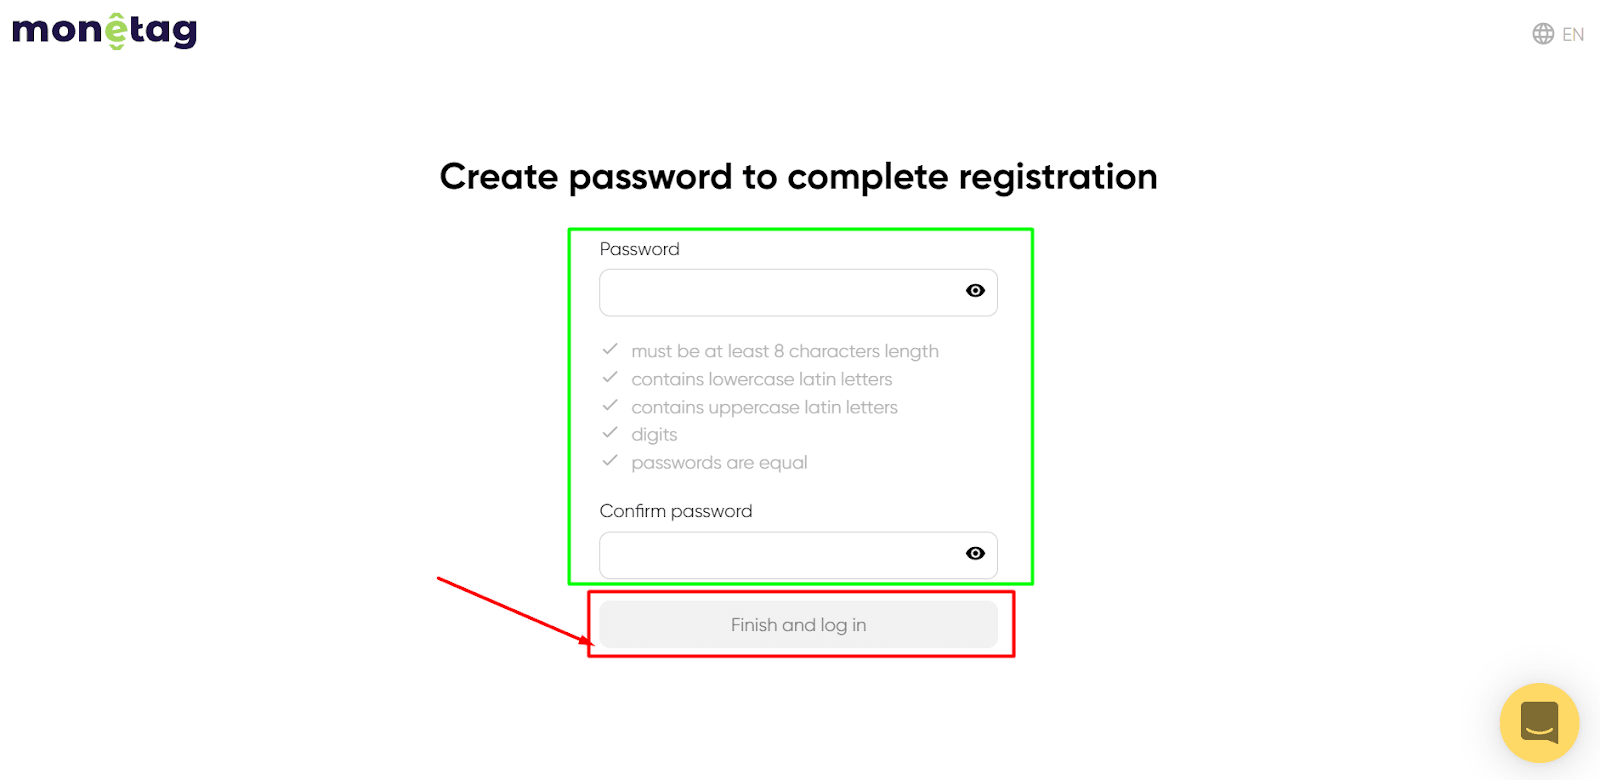 Monetag Create Password and Complete Registration